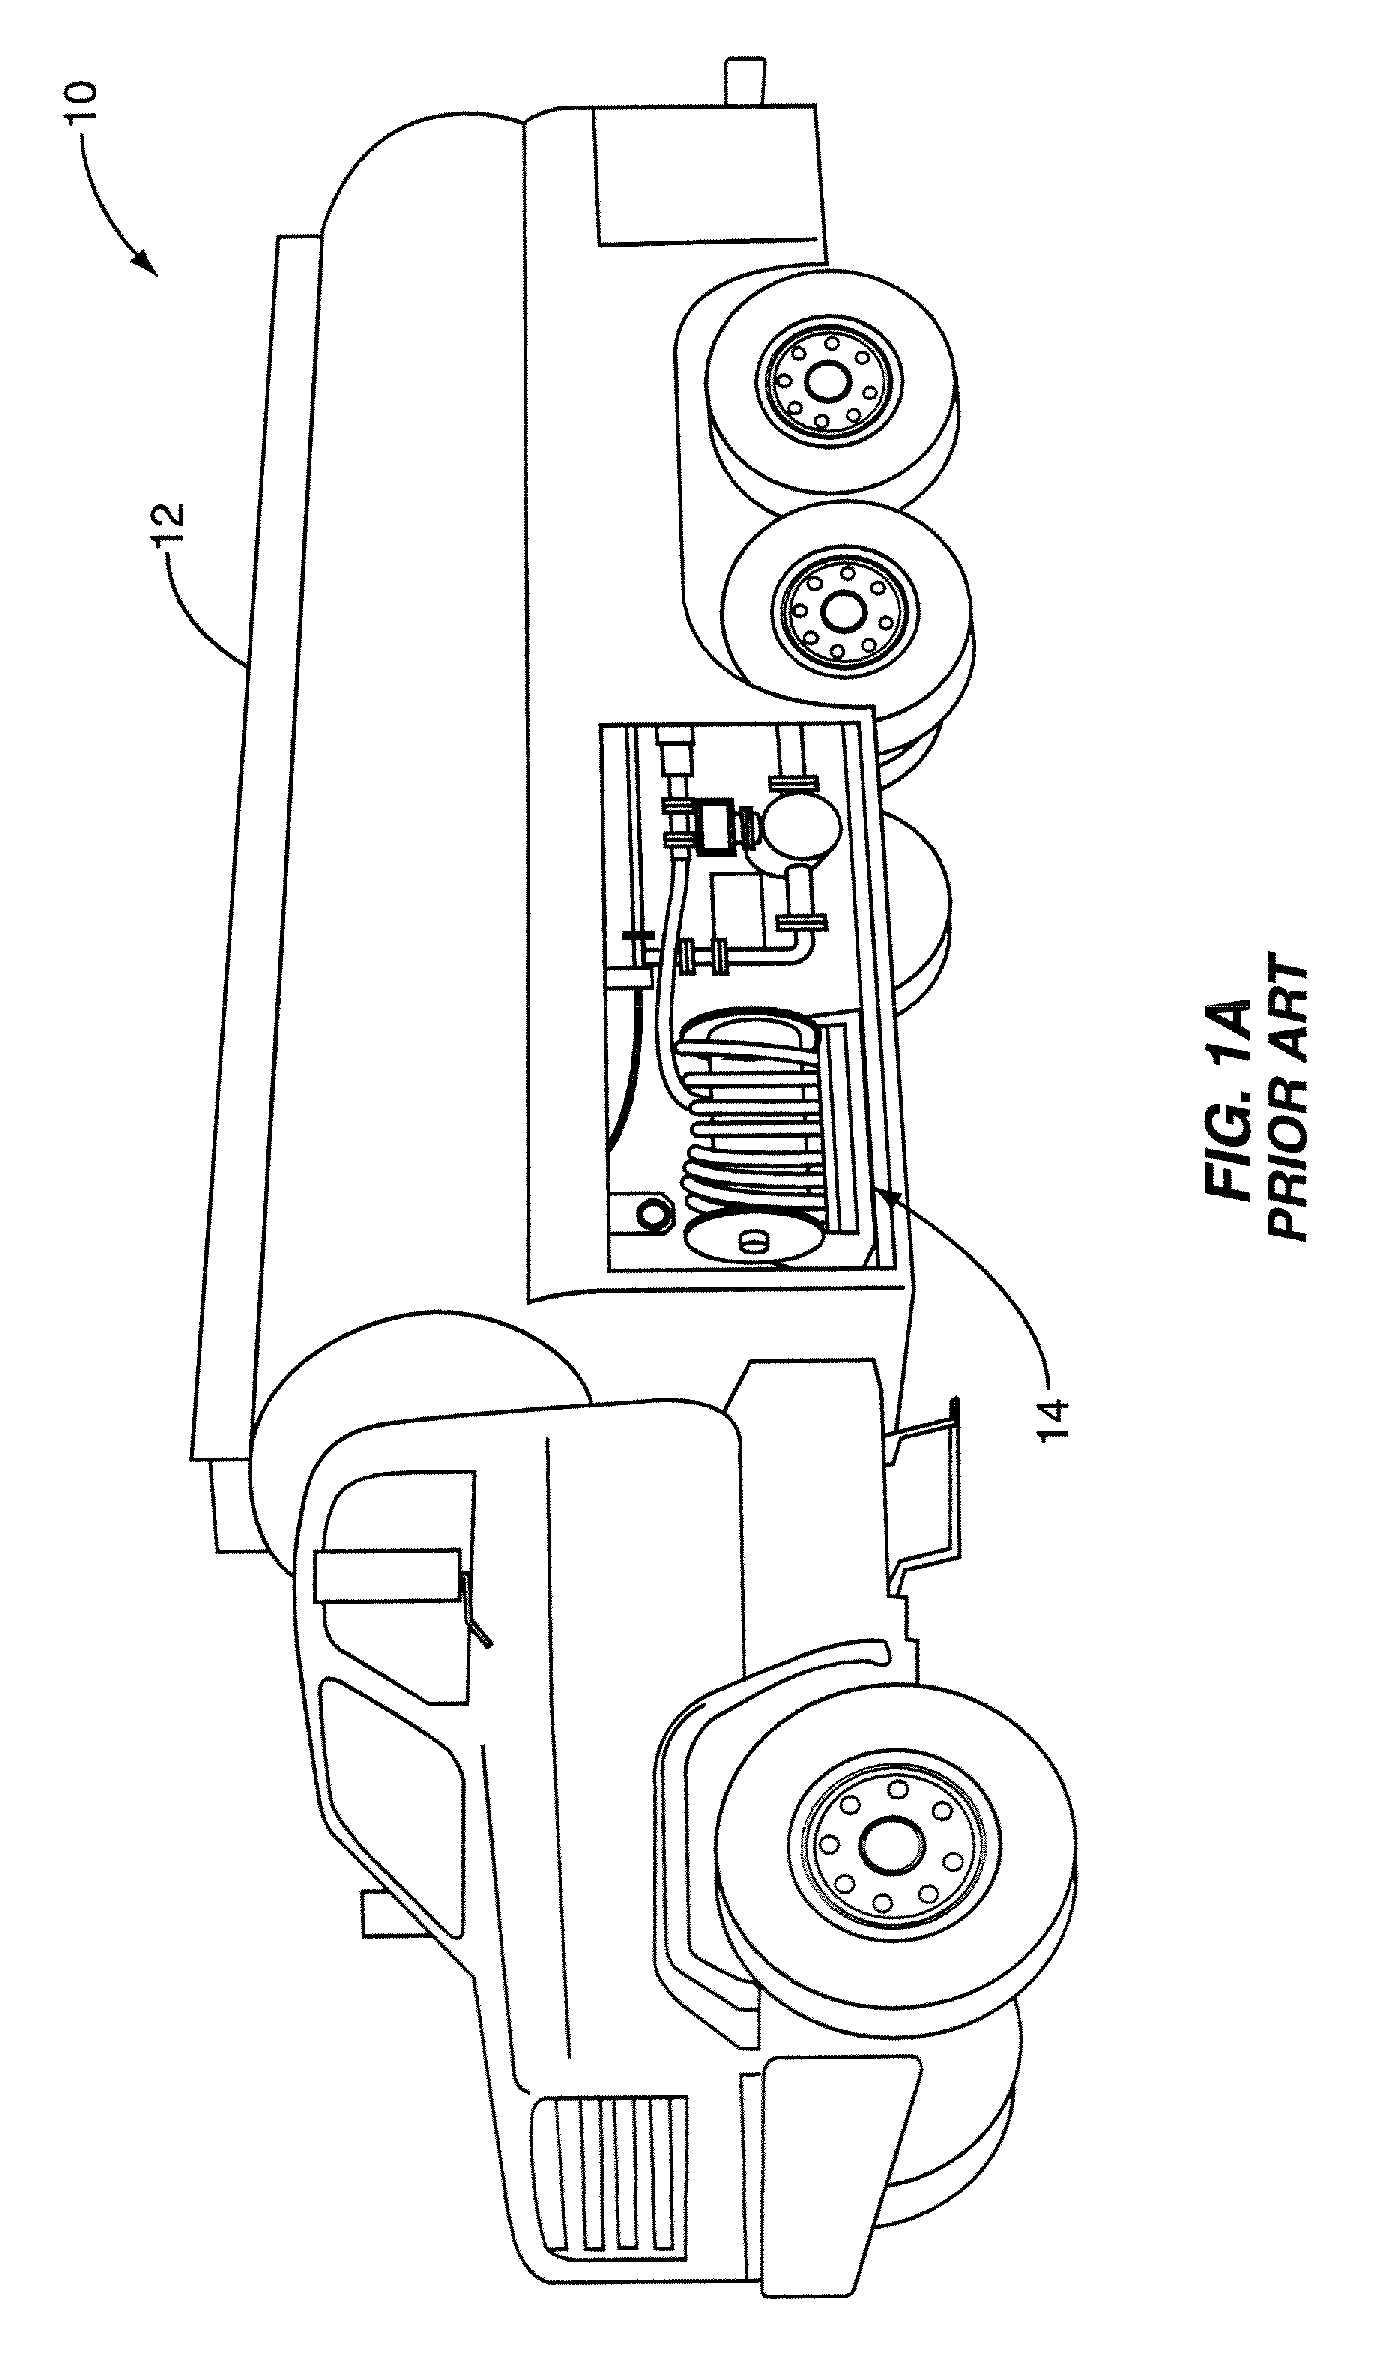 Automated Fuel Quality Detection and Dispenser Control System and Method, Particularly for Aviation Fueling Applications